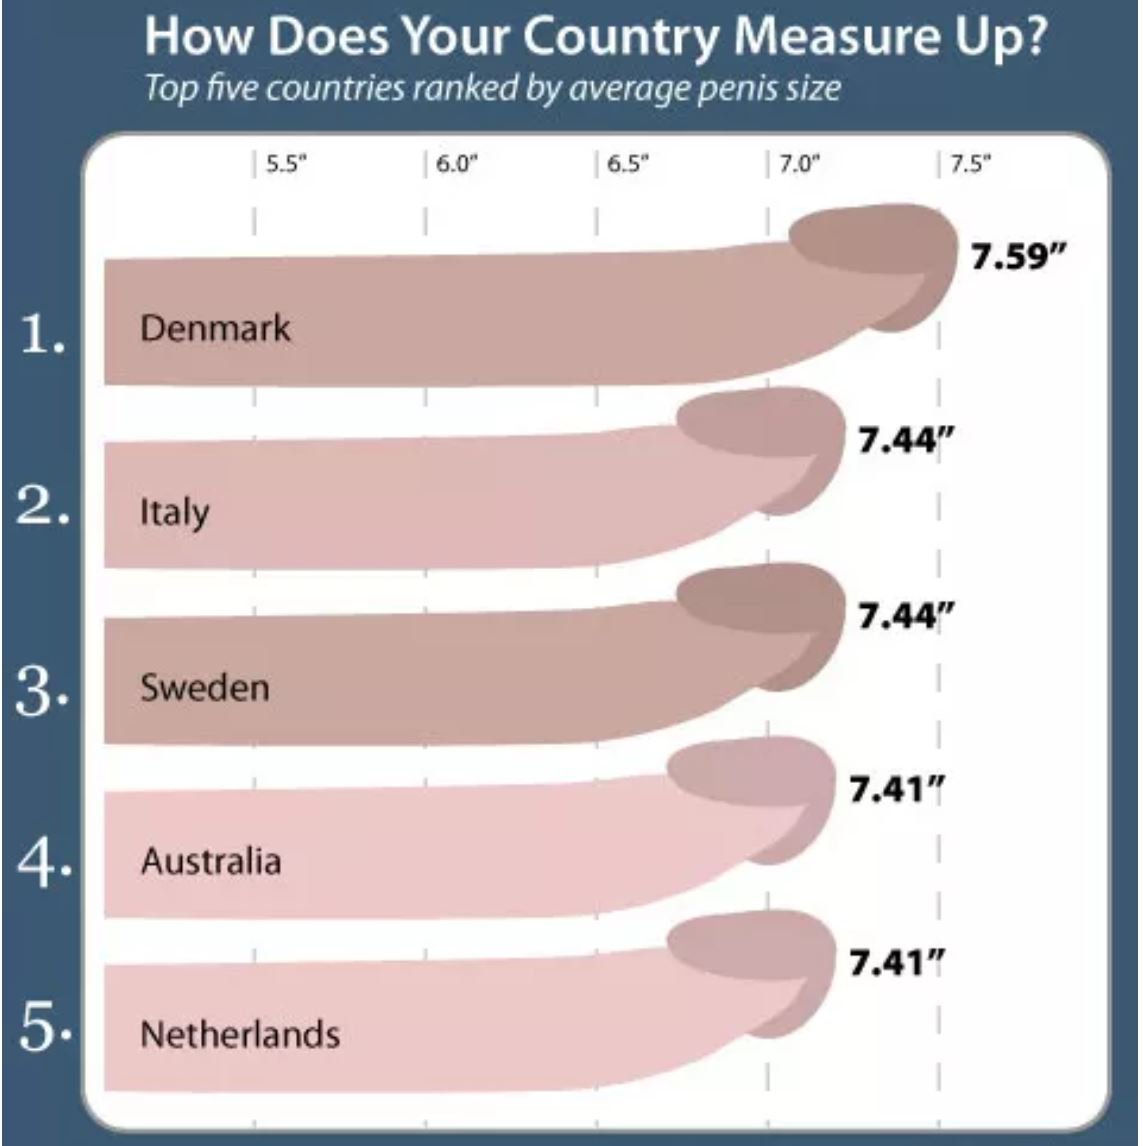 More research...How do you measure up? #dicksize #sizematters #sizequeen.